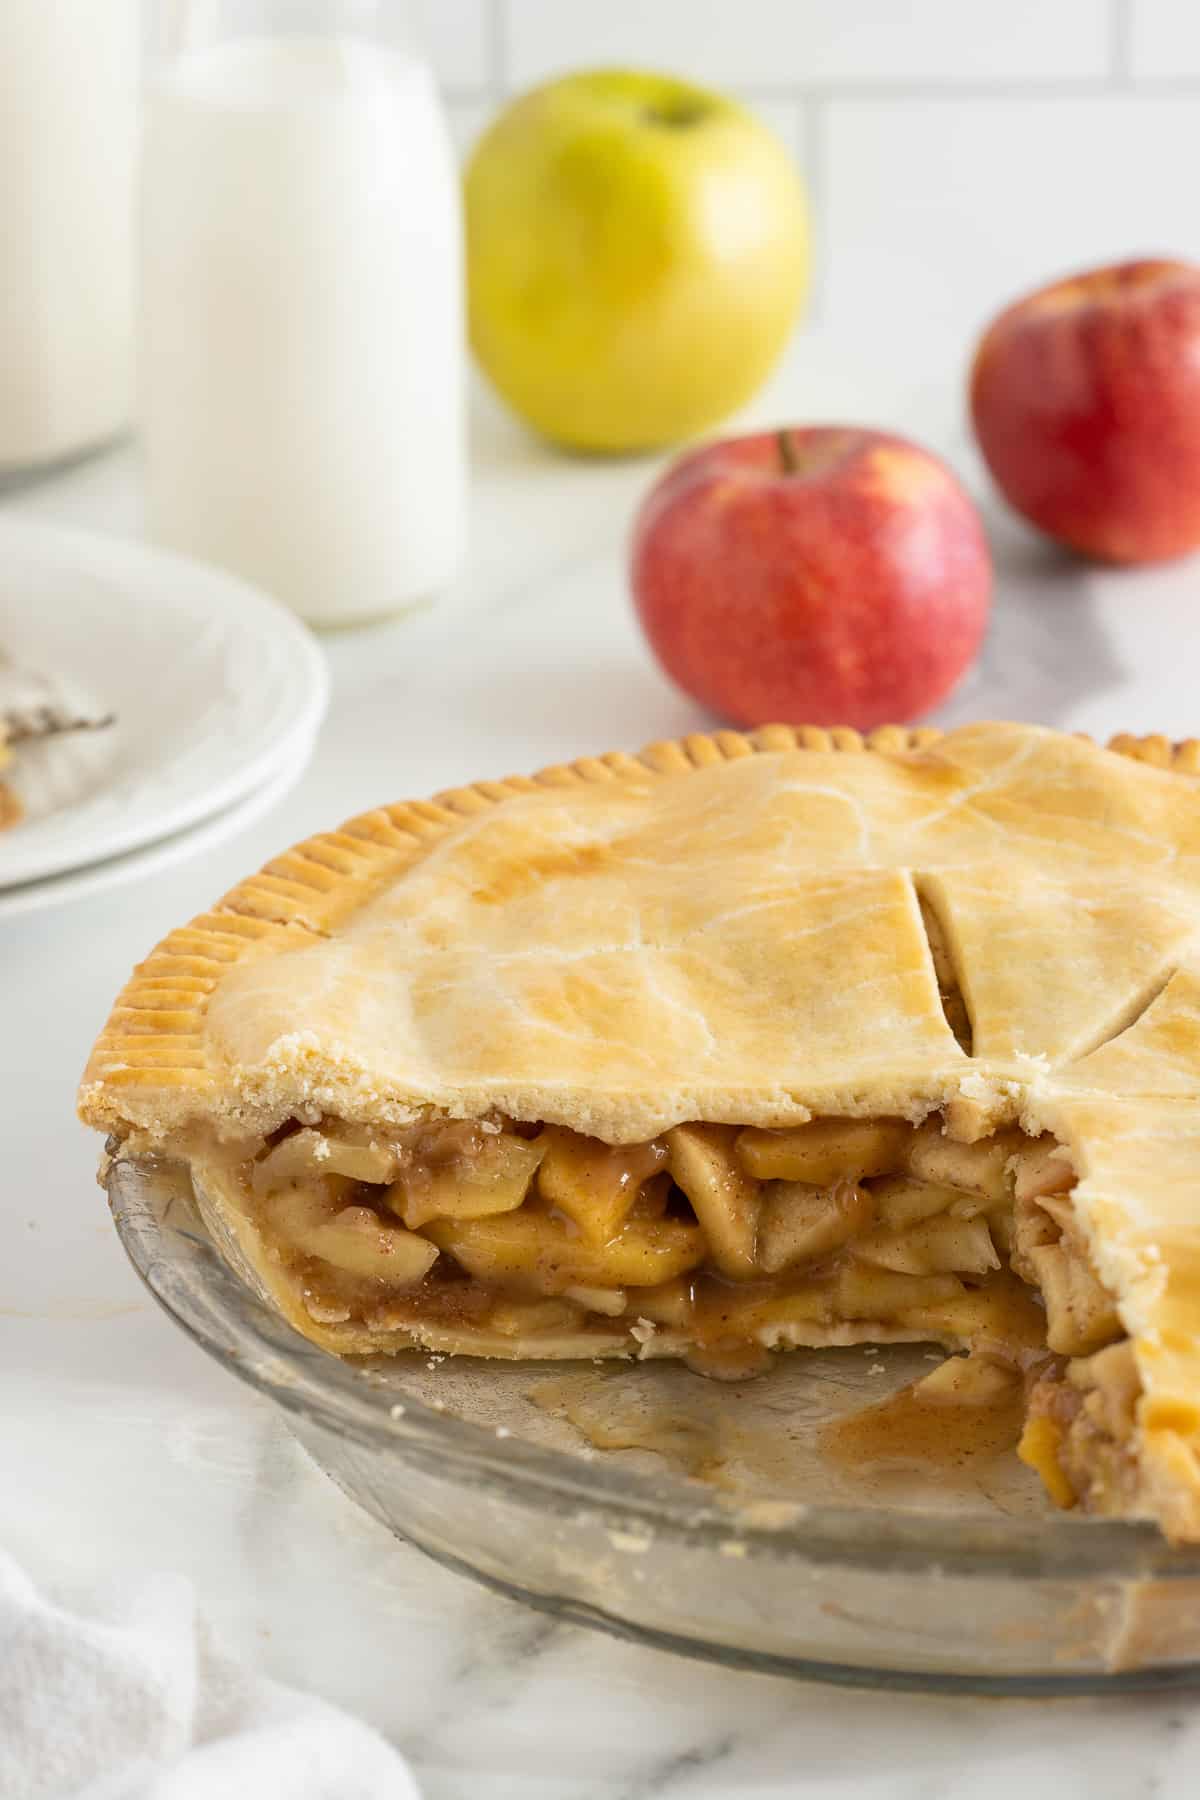 A side view of a sliced apple pie revealing the apple pie filling.